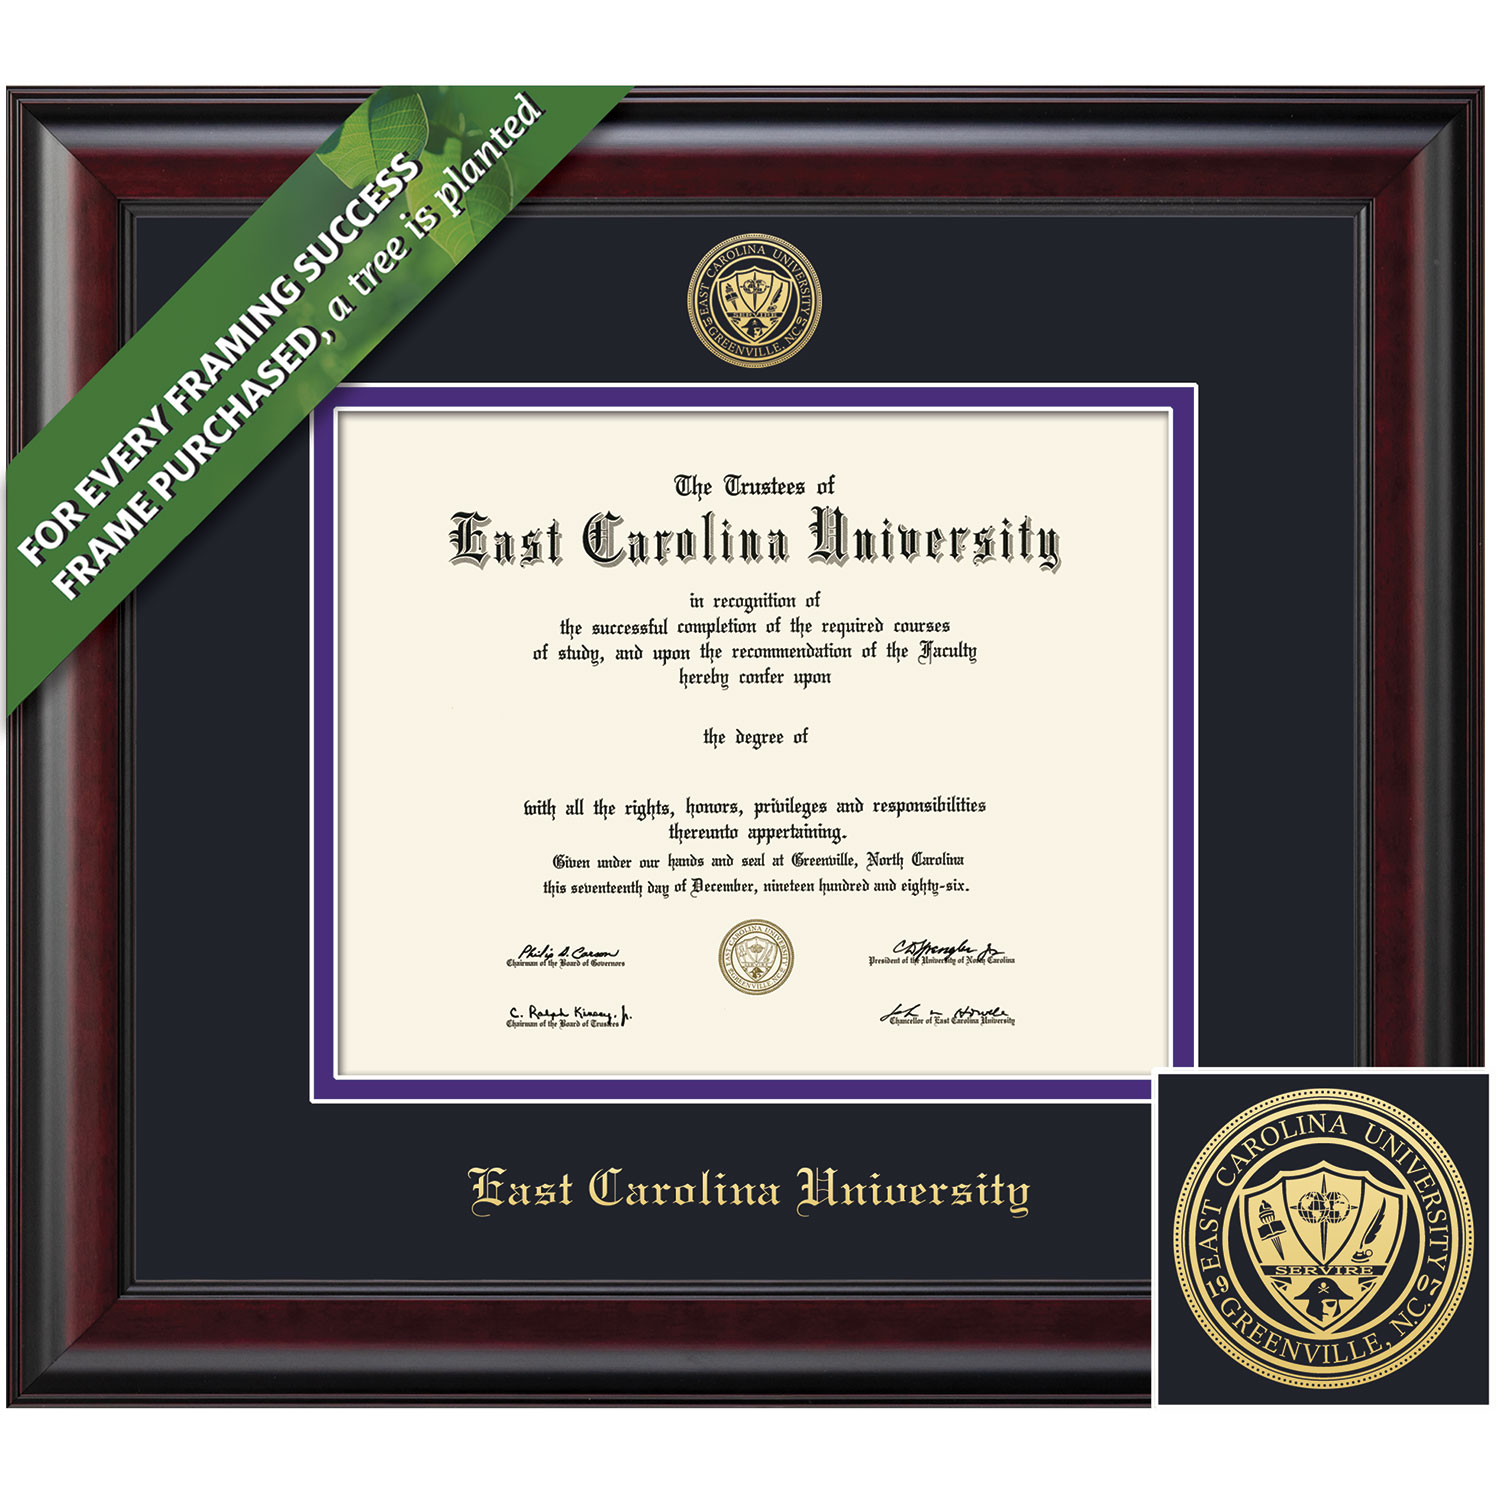 Framing Success 11 x 14 Classic Gold Embossed School Seal Bachelors, Masters, PhD Diploma Frame